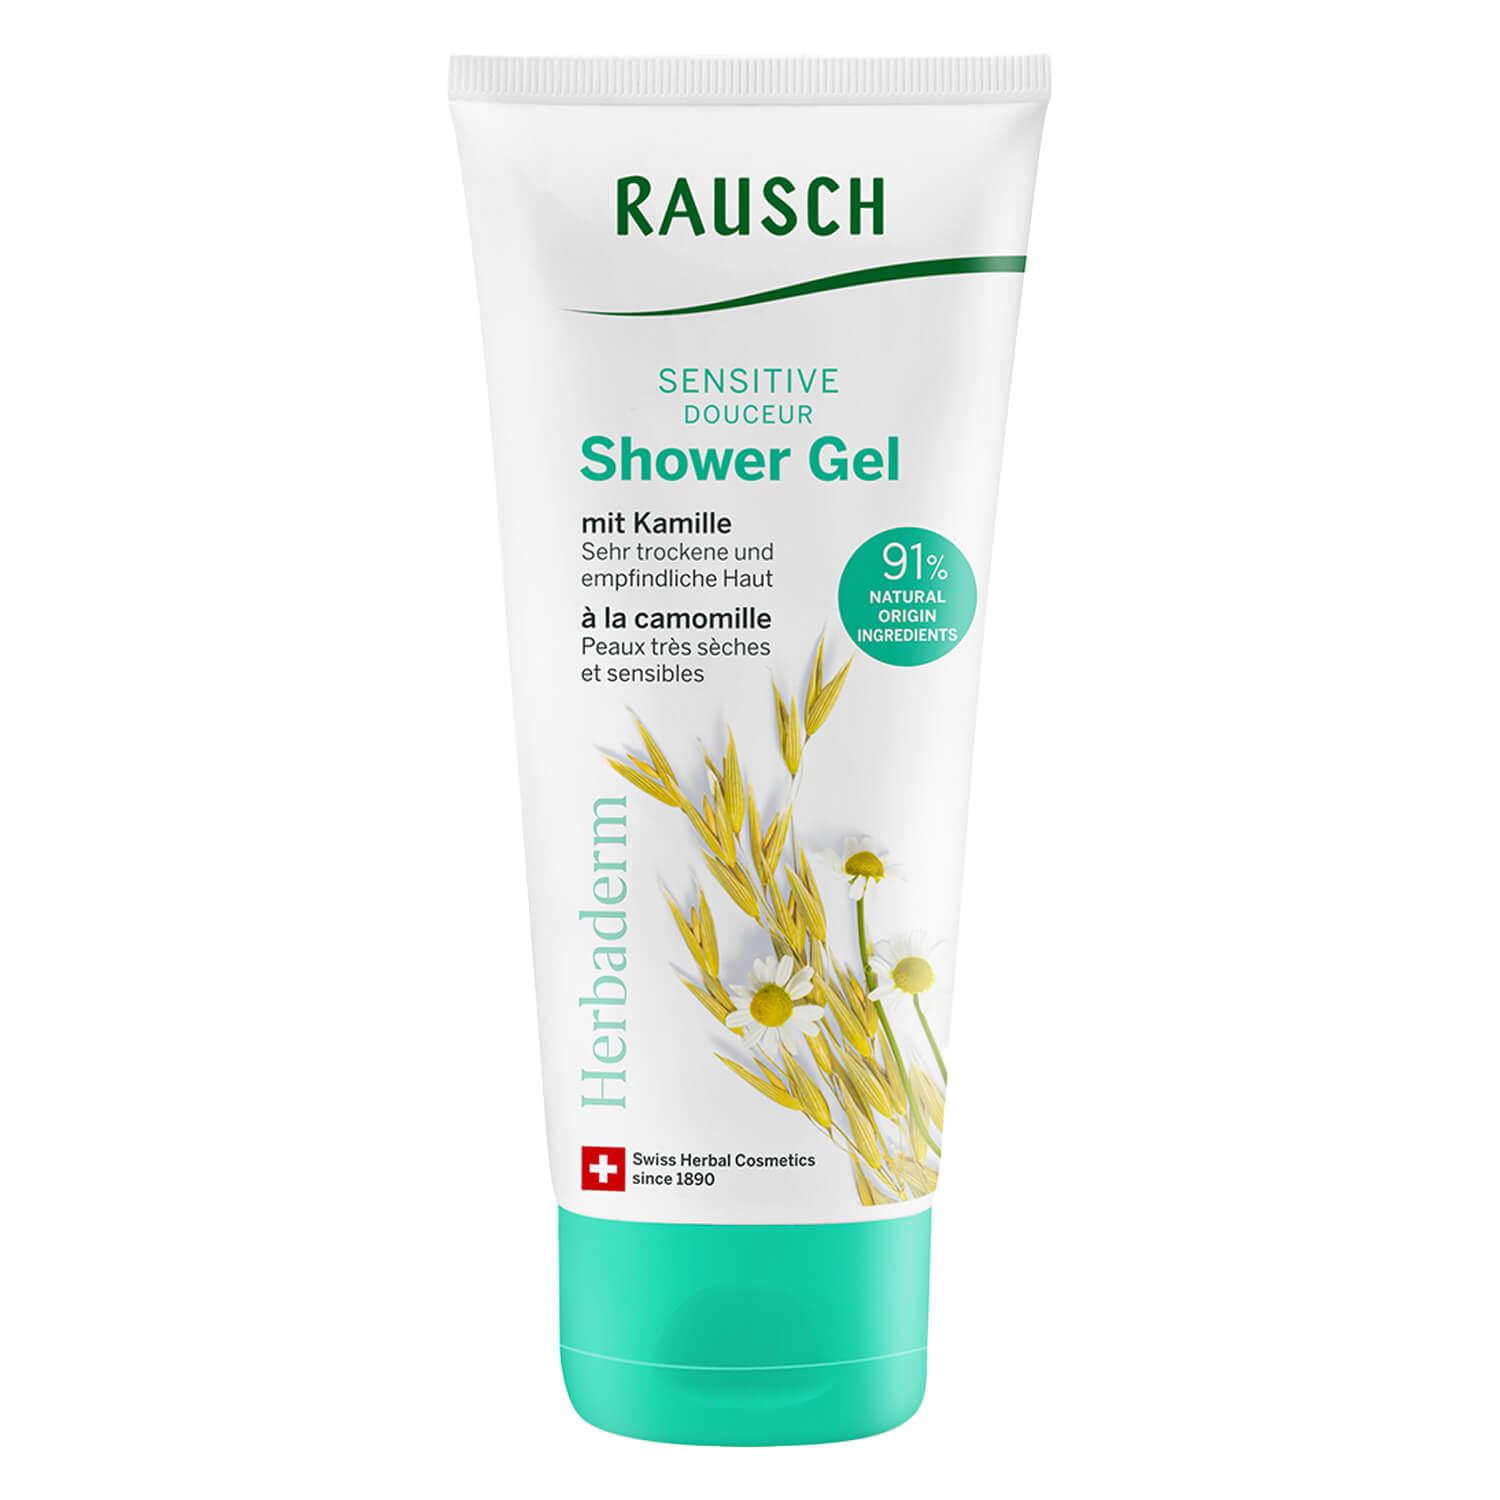 RAUSCH Body - Sensitive Shower Gel with chamomile